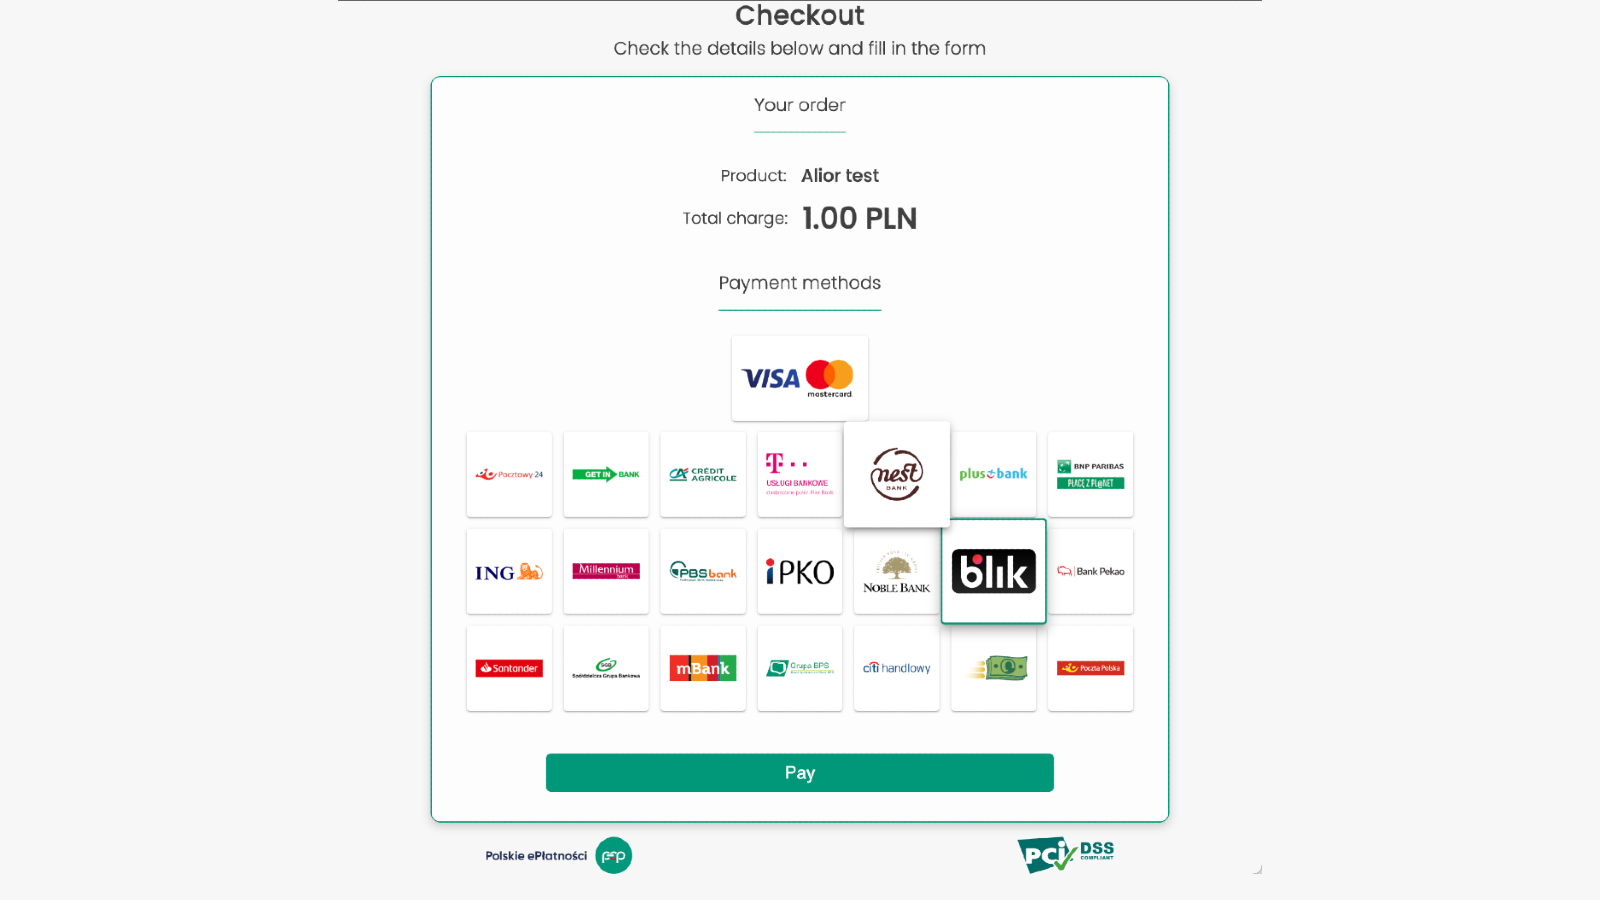 Get redirected to PEP checkout and enter payment details